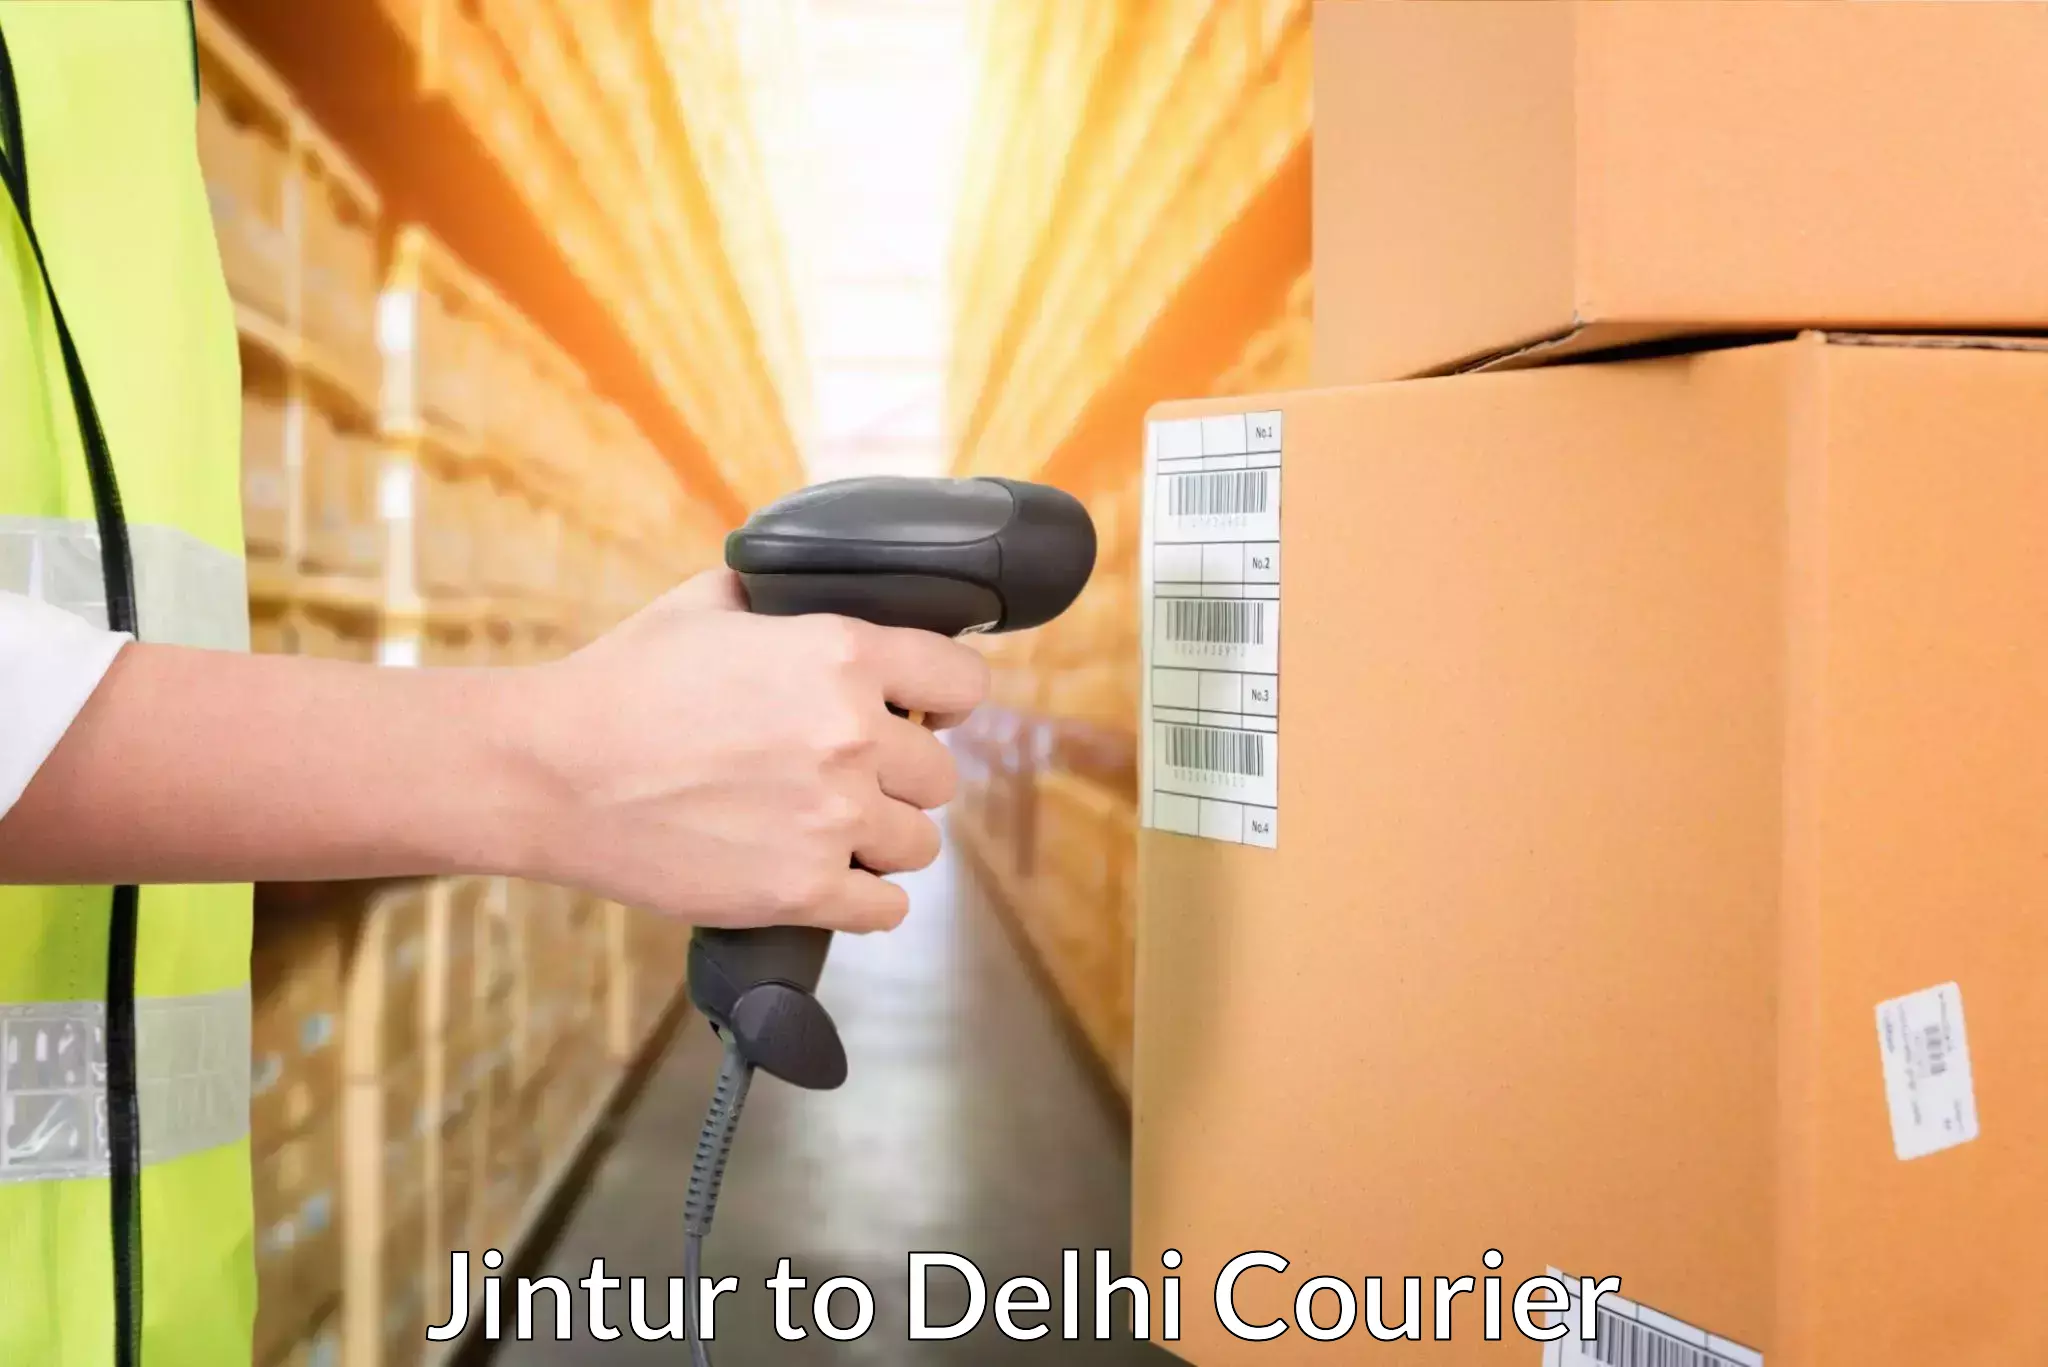 Express delivery solutions Jintur to Burari